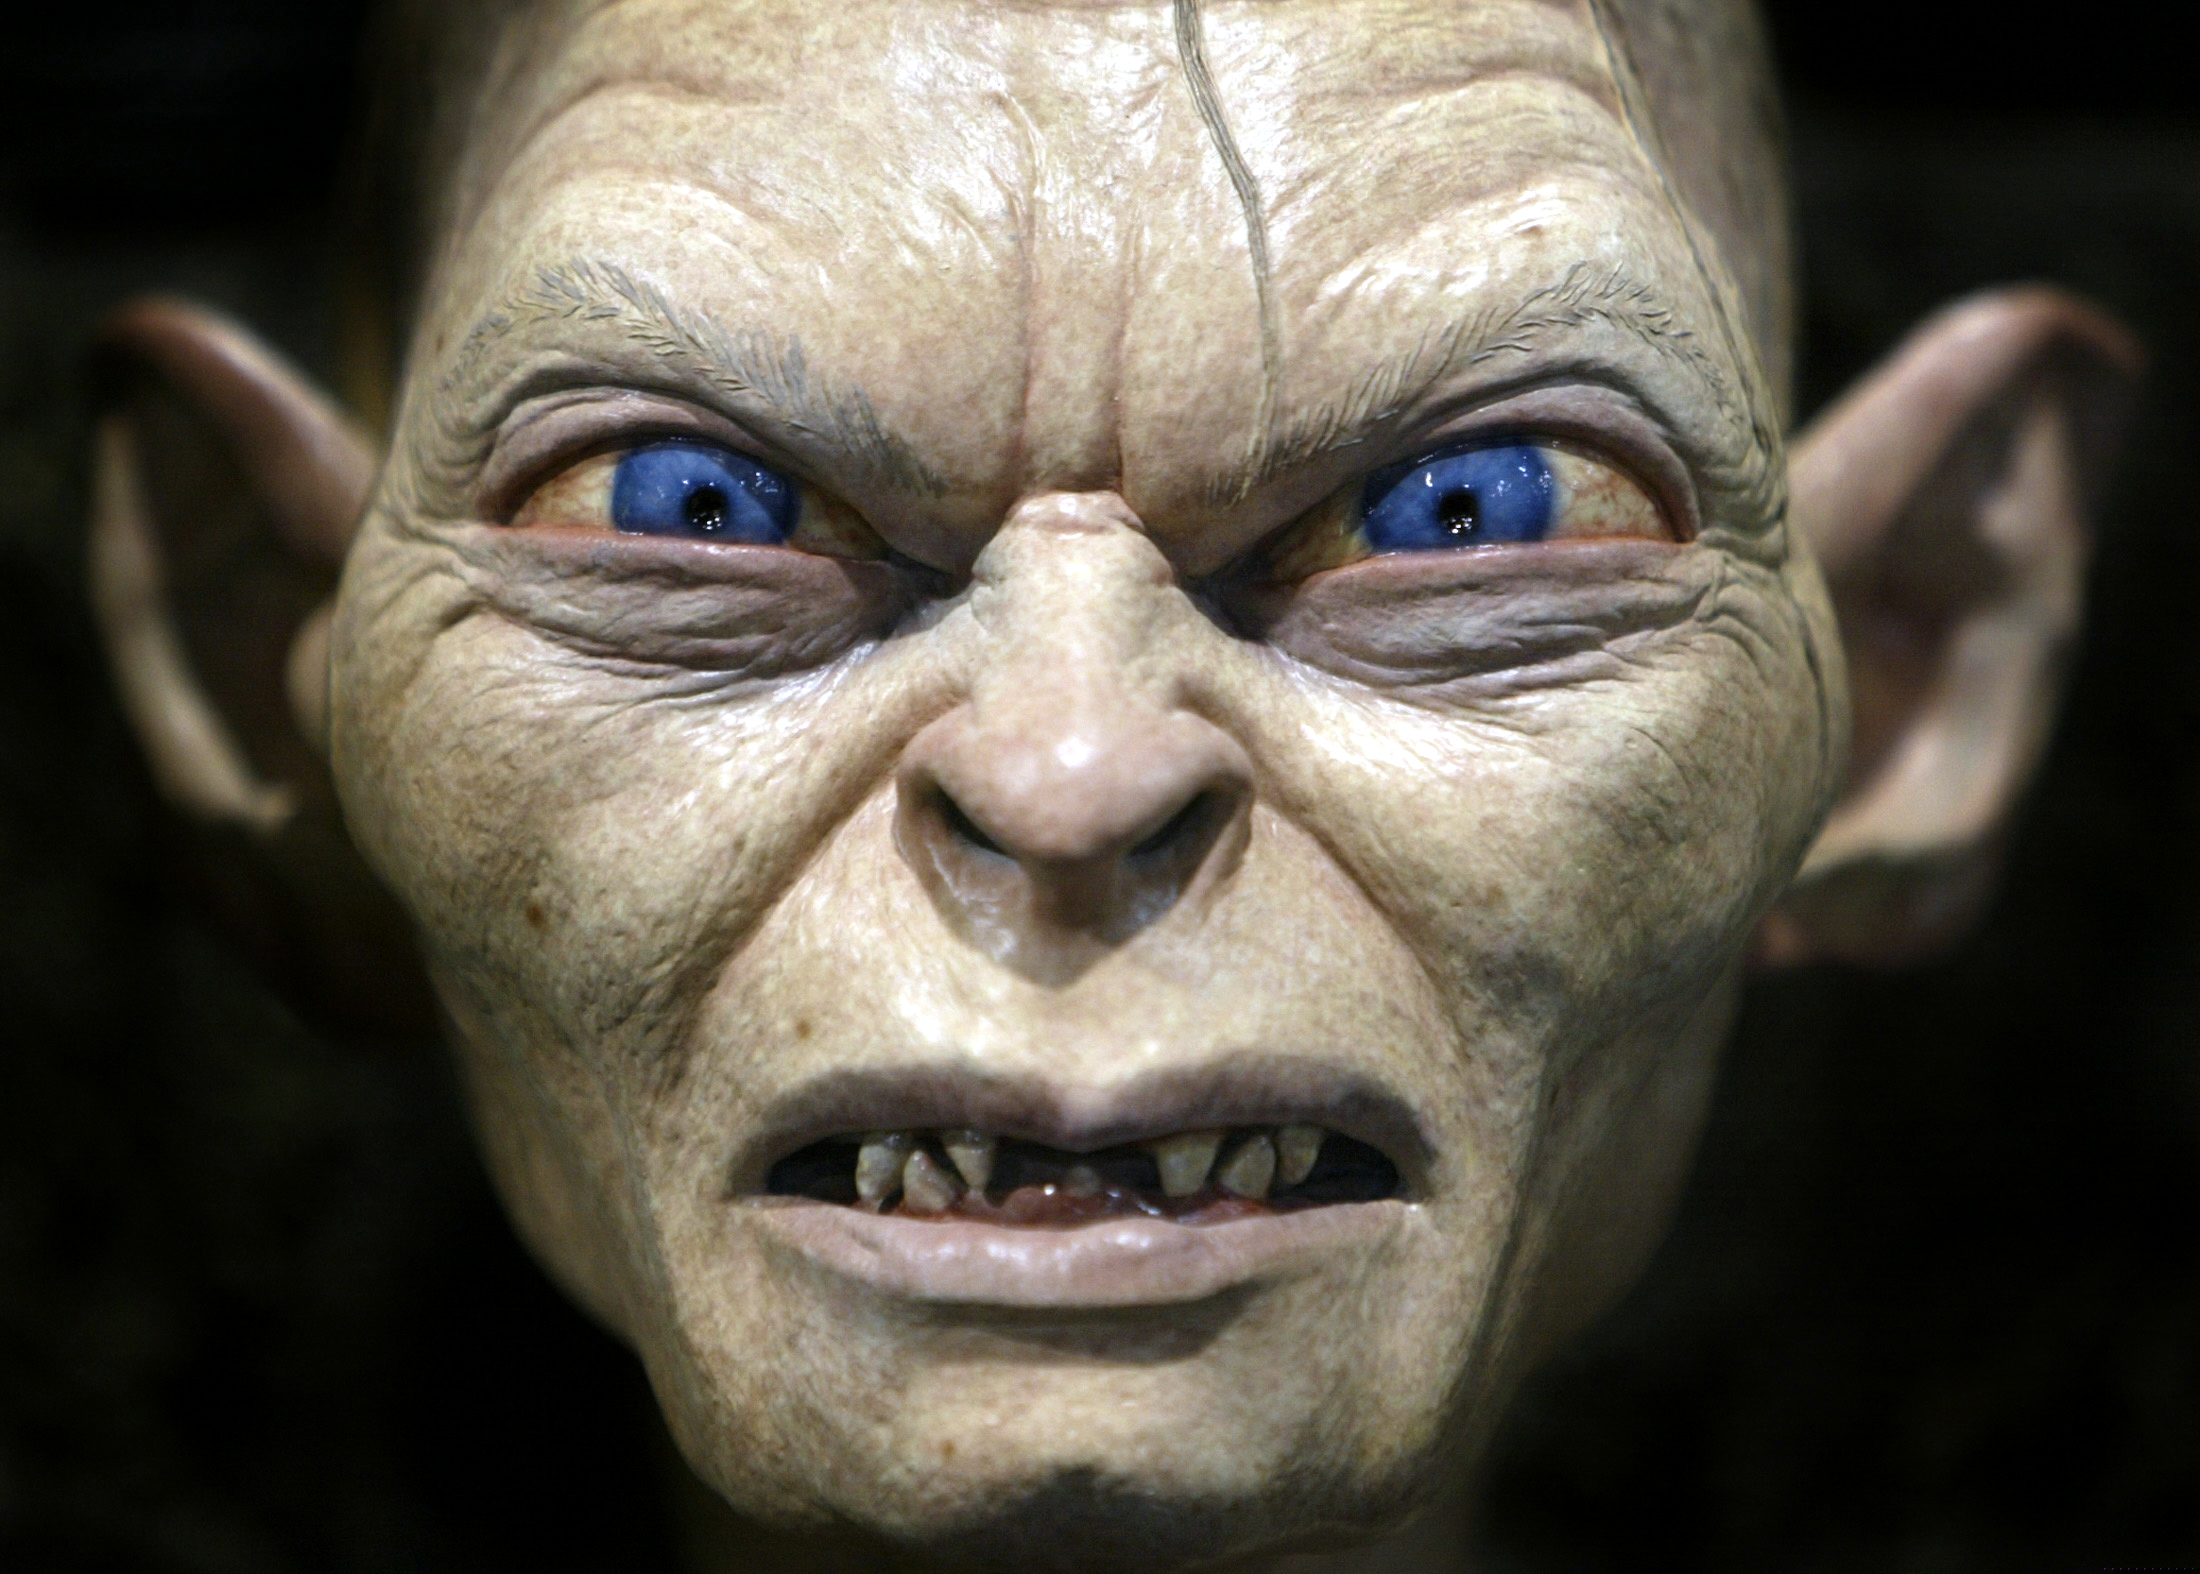 LORD OF THE RINGS CREATURE ON DISPLAY AT COMIC CON IN SAN DIEGO.